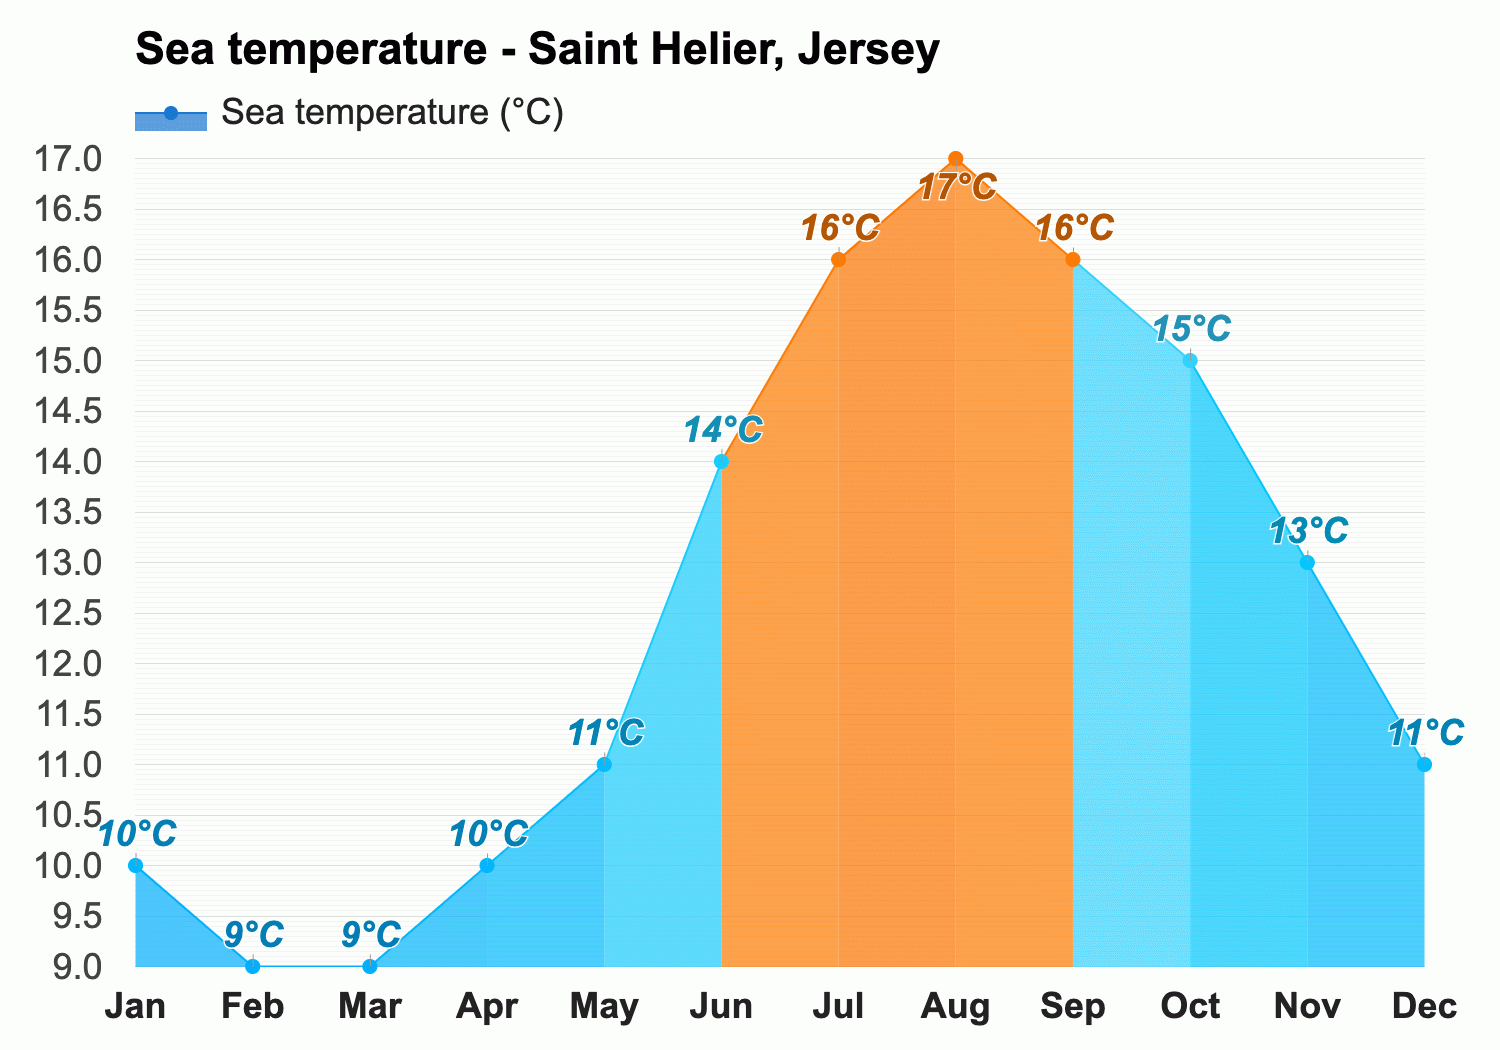 Saint Helier, Jersey - Climate & Monthly weather forecast